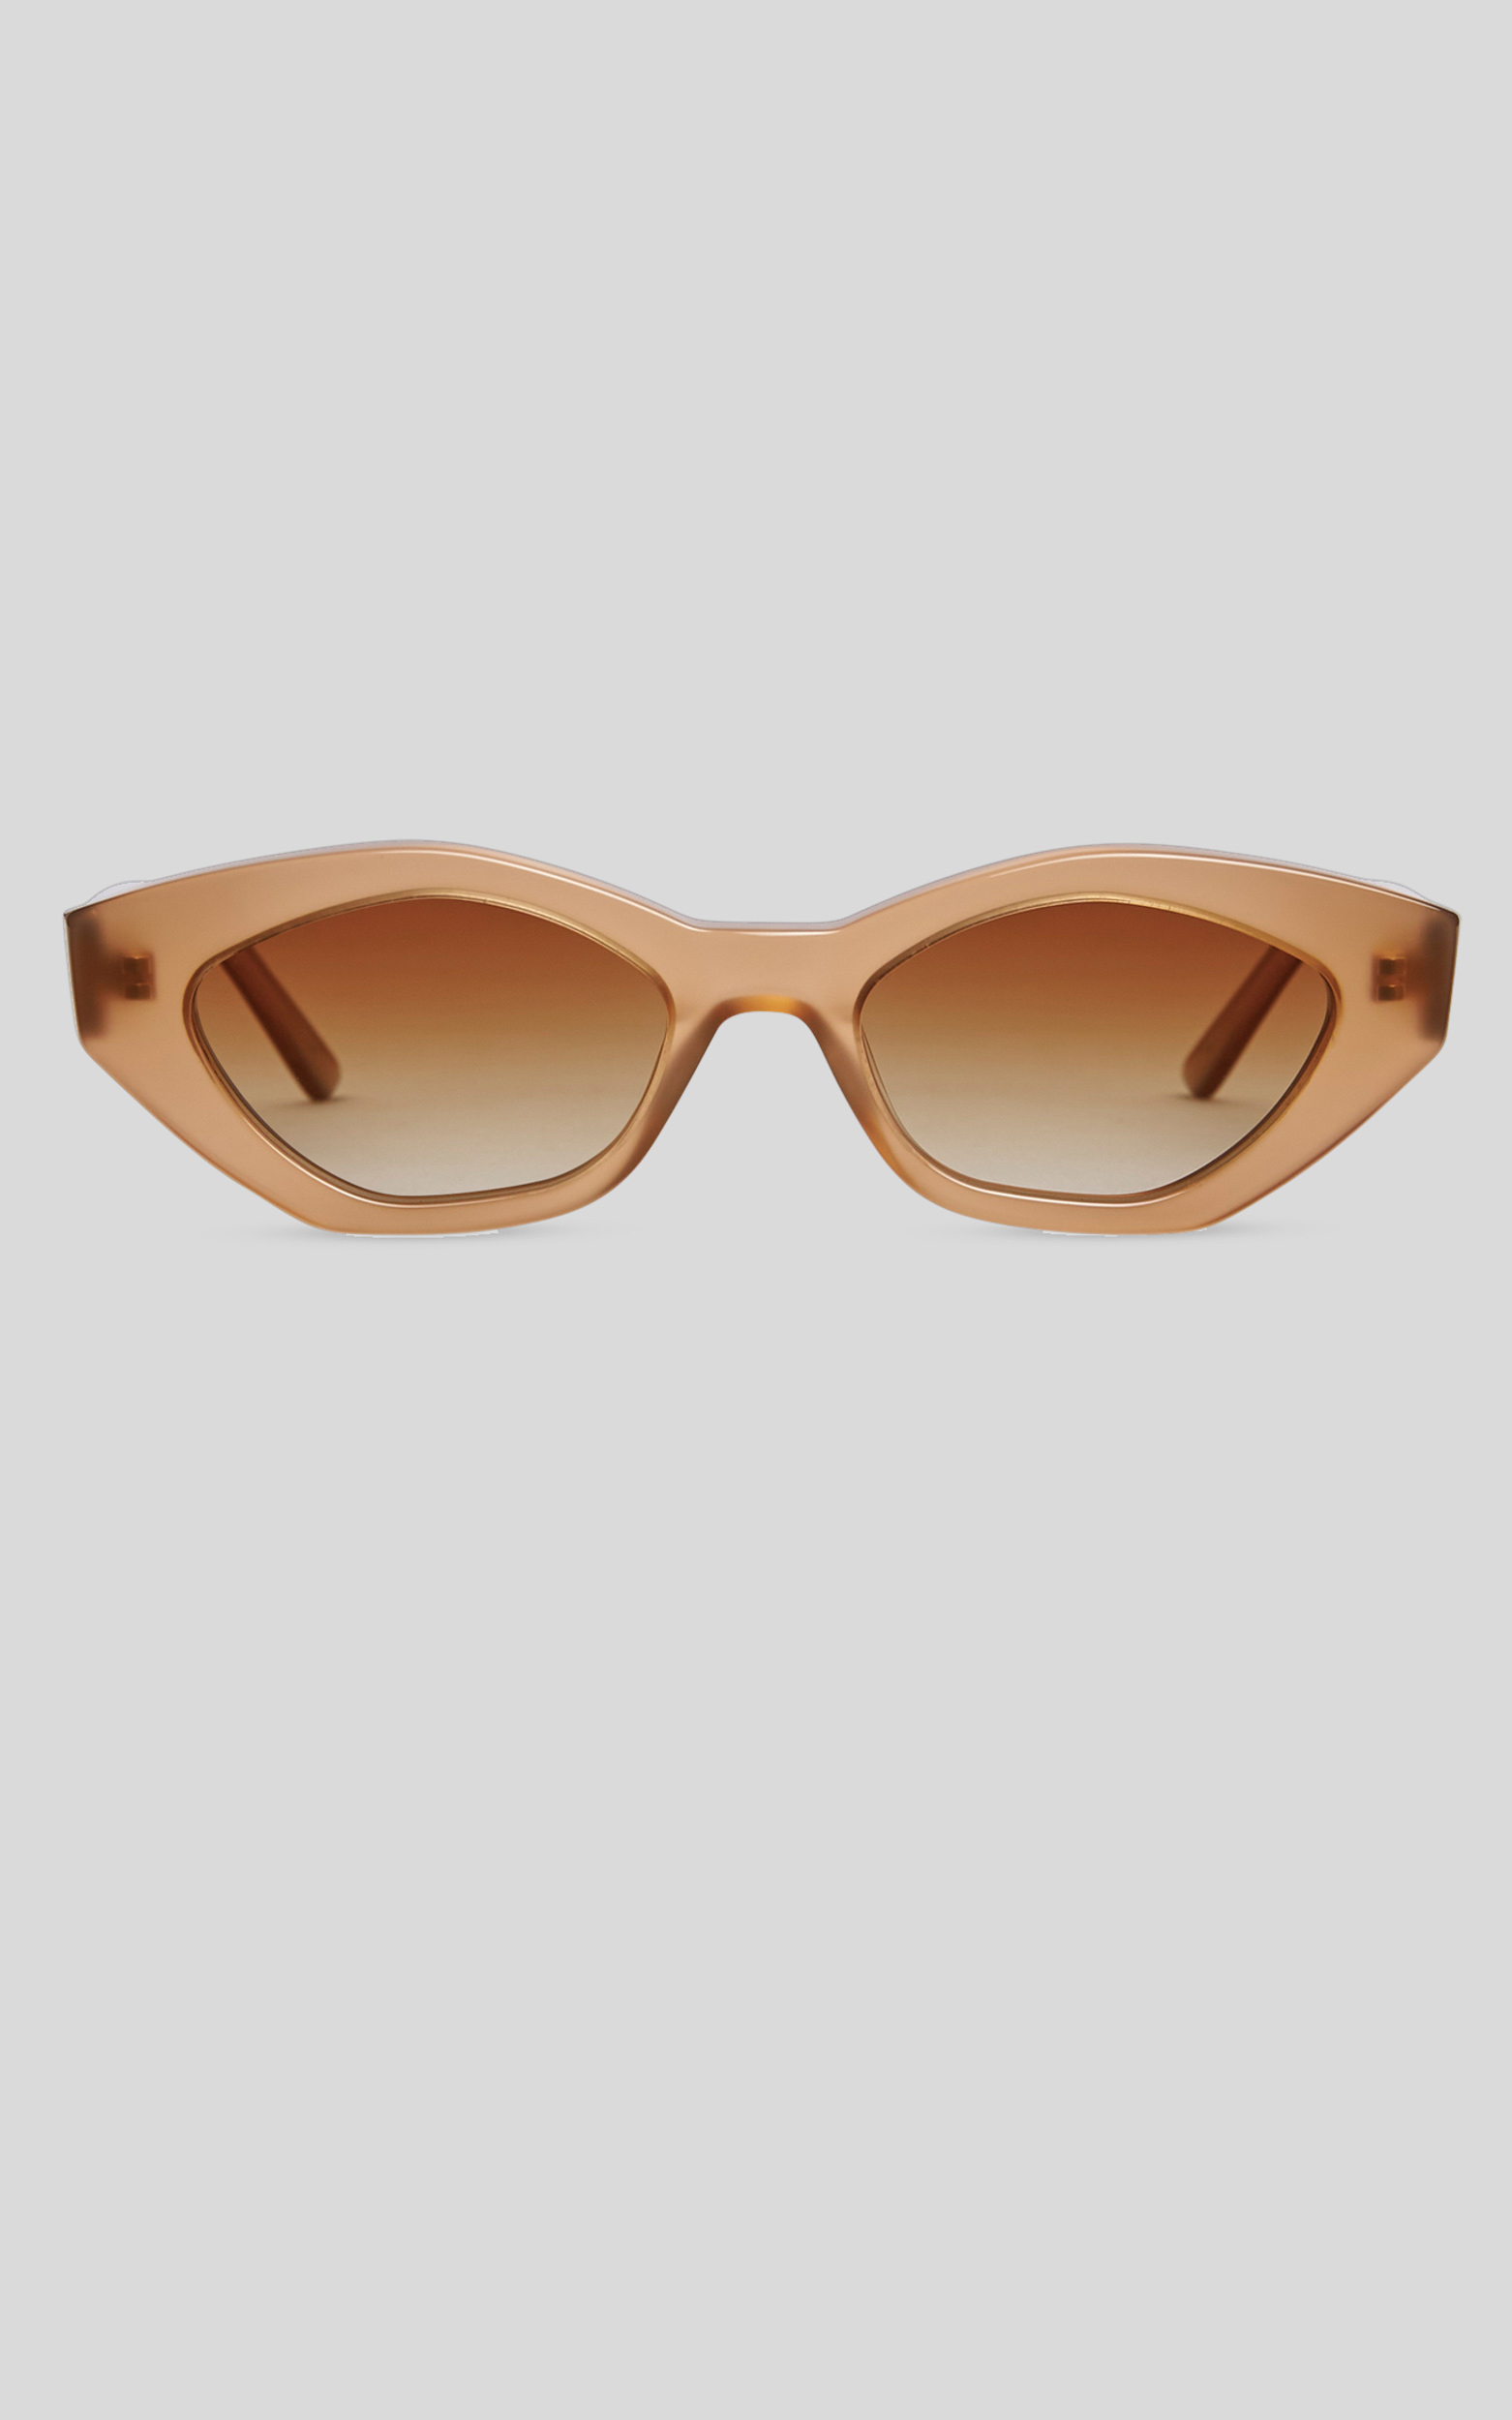 Banbe Eyewear - The Eva in Amber Fade - NoSize, ORG2, hi-res image number null